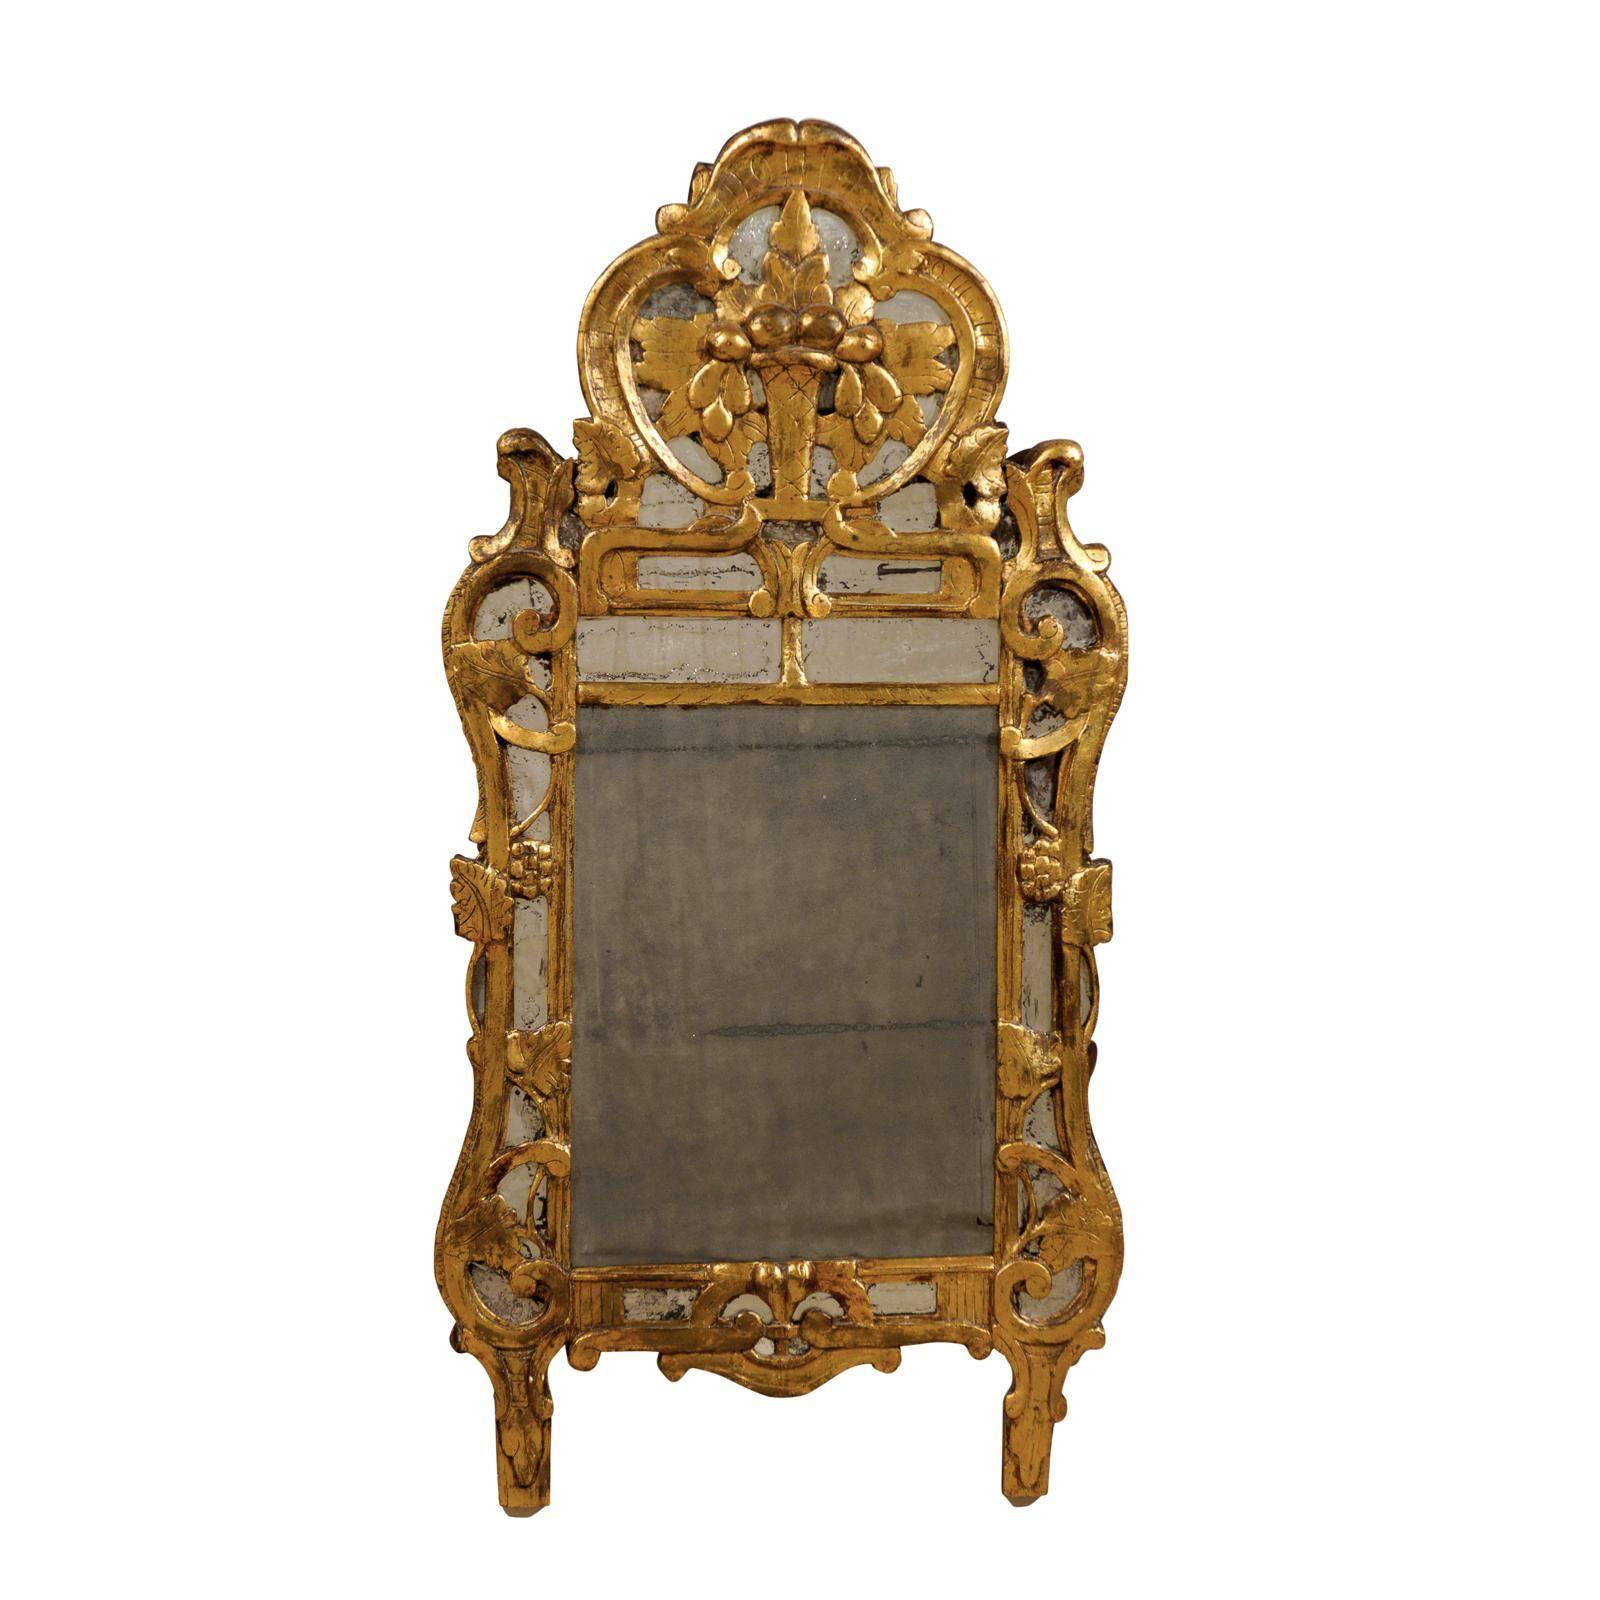 A French Rococo Style Giltwood Mirror From the Early 19th Century